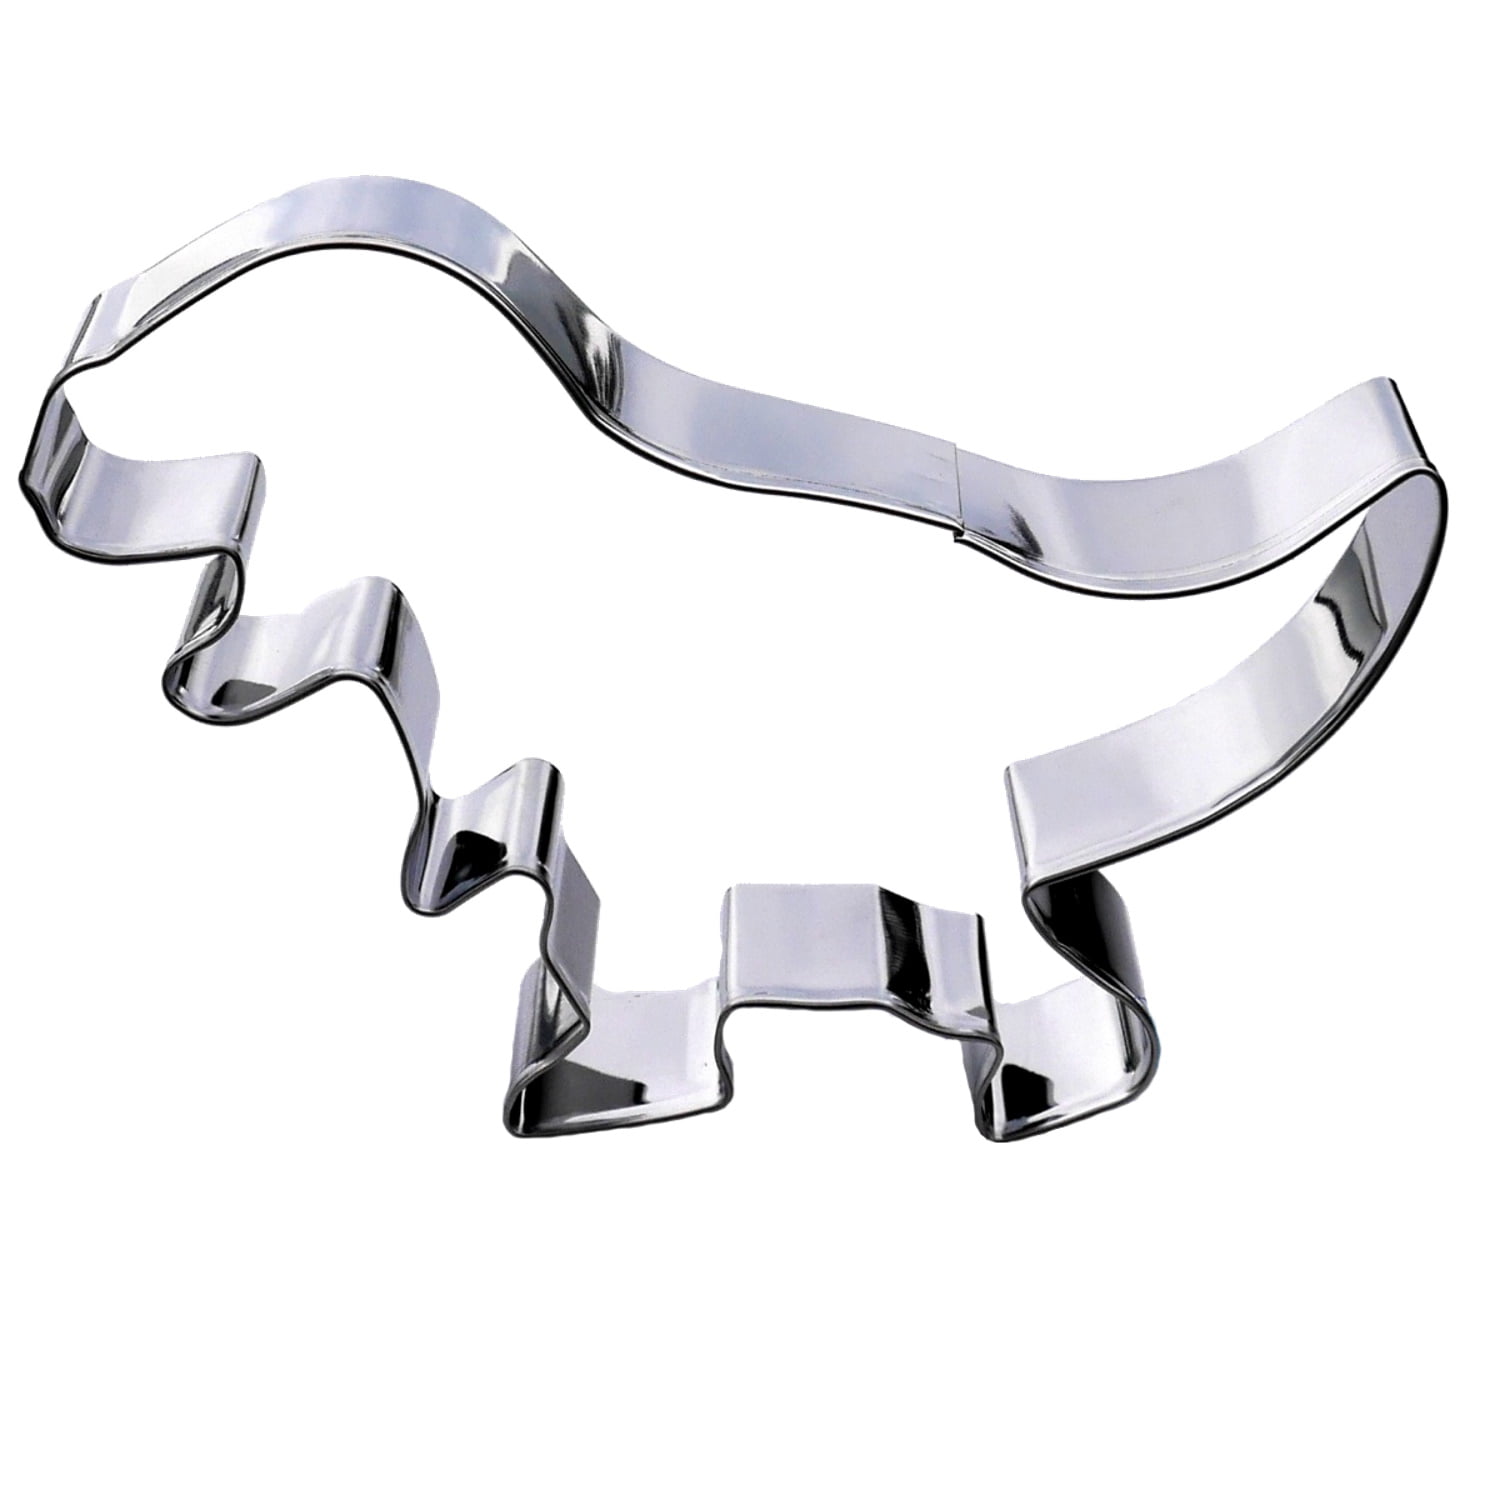 Dinosaur D Stainless Steel Cookies Cutters Cake Baking Biscuit DIY Mould Mold /